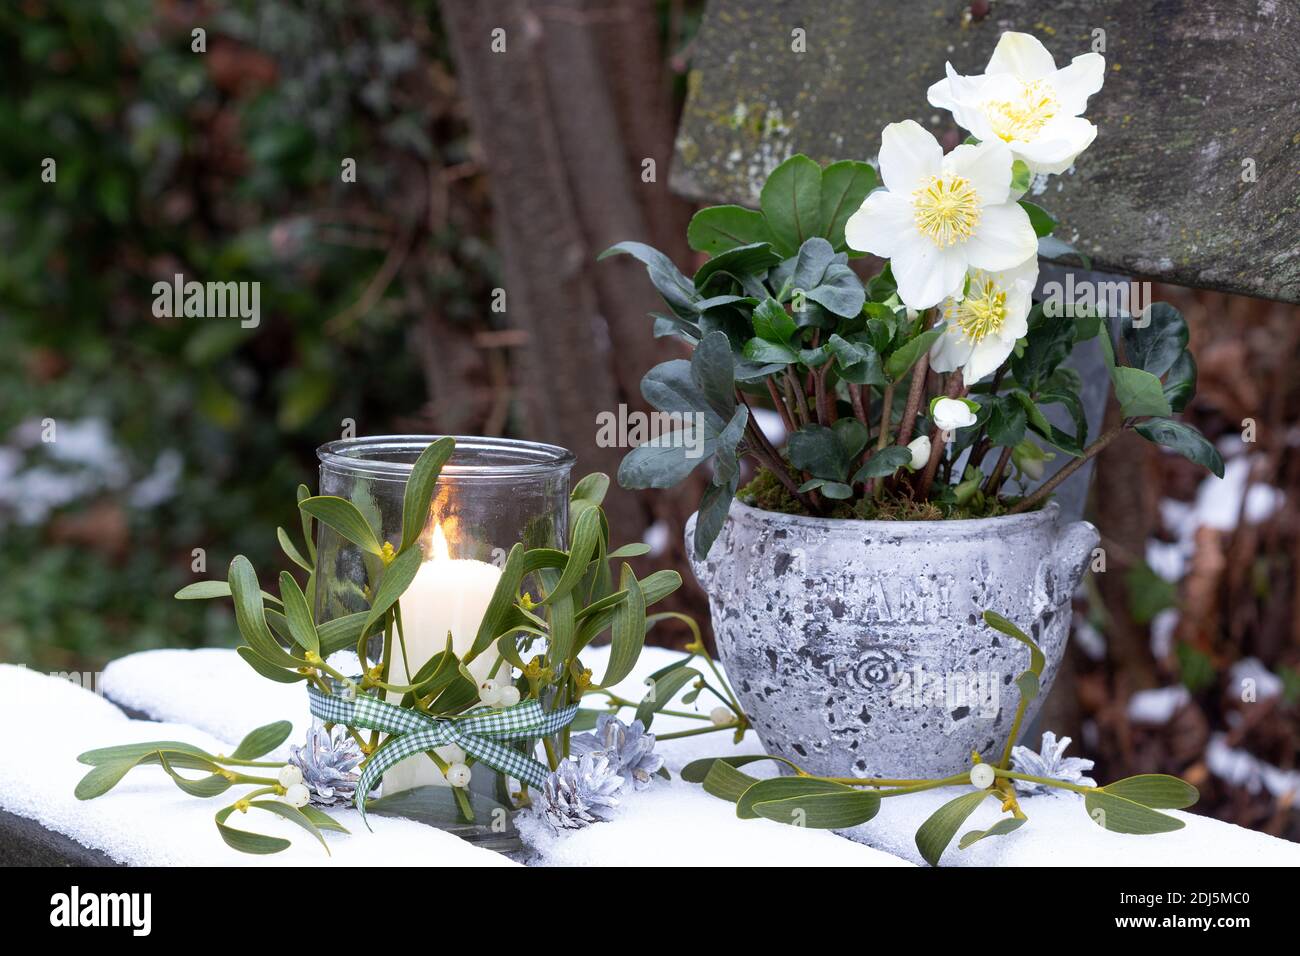 christmas garden decoration with helleborus niger and glass lantern decorated with mistletoe Stock Photo